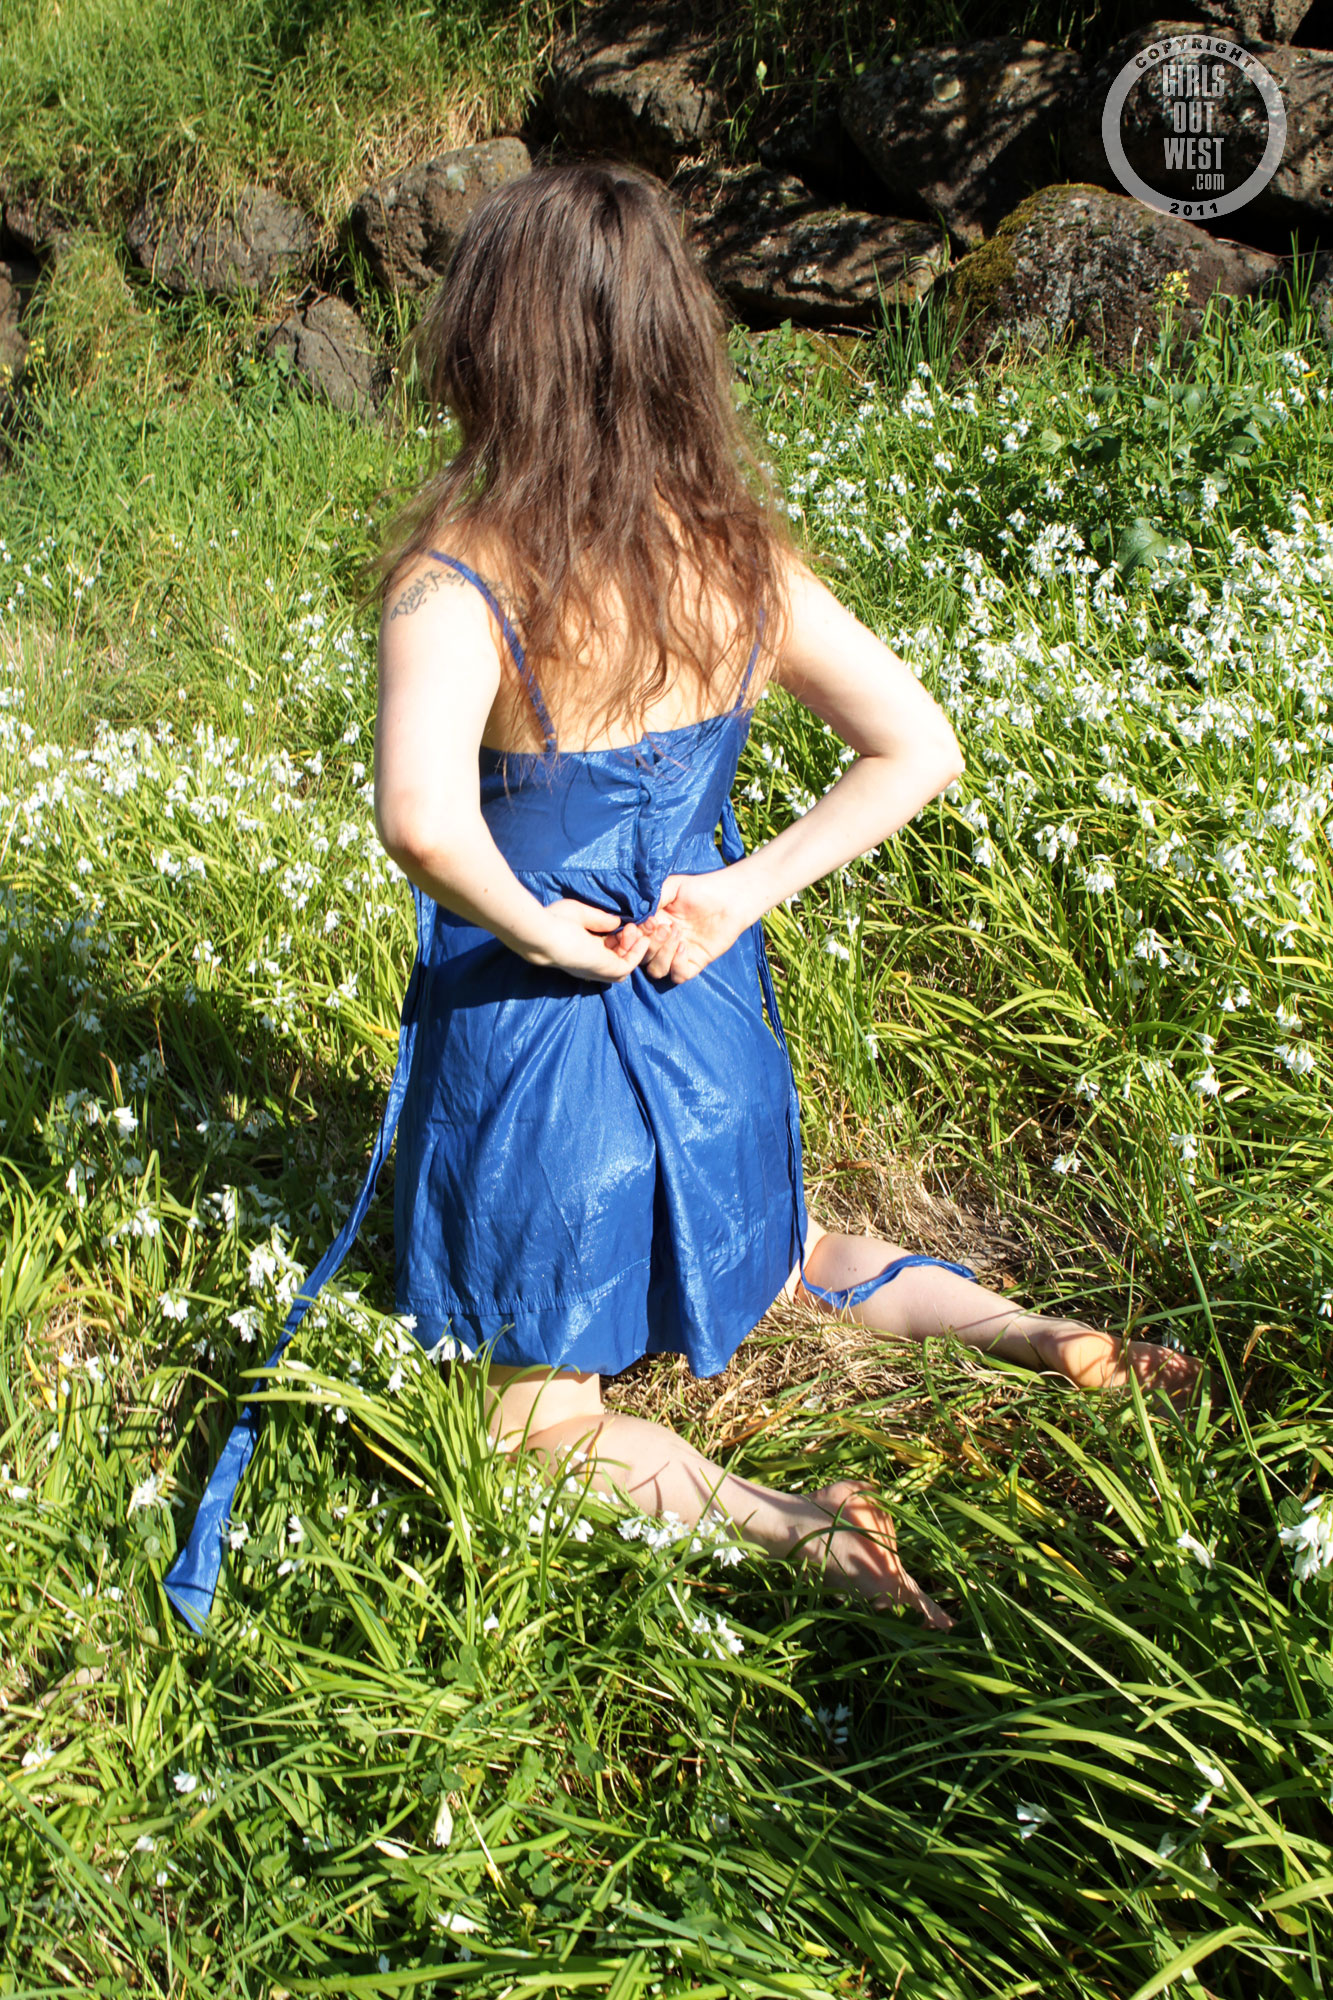 wpid-petite-amateur-sunny-strips-and-plays-naked-in-a-field6.jpg